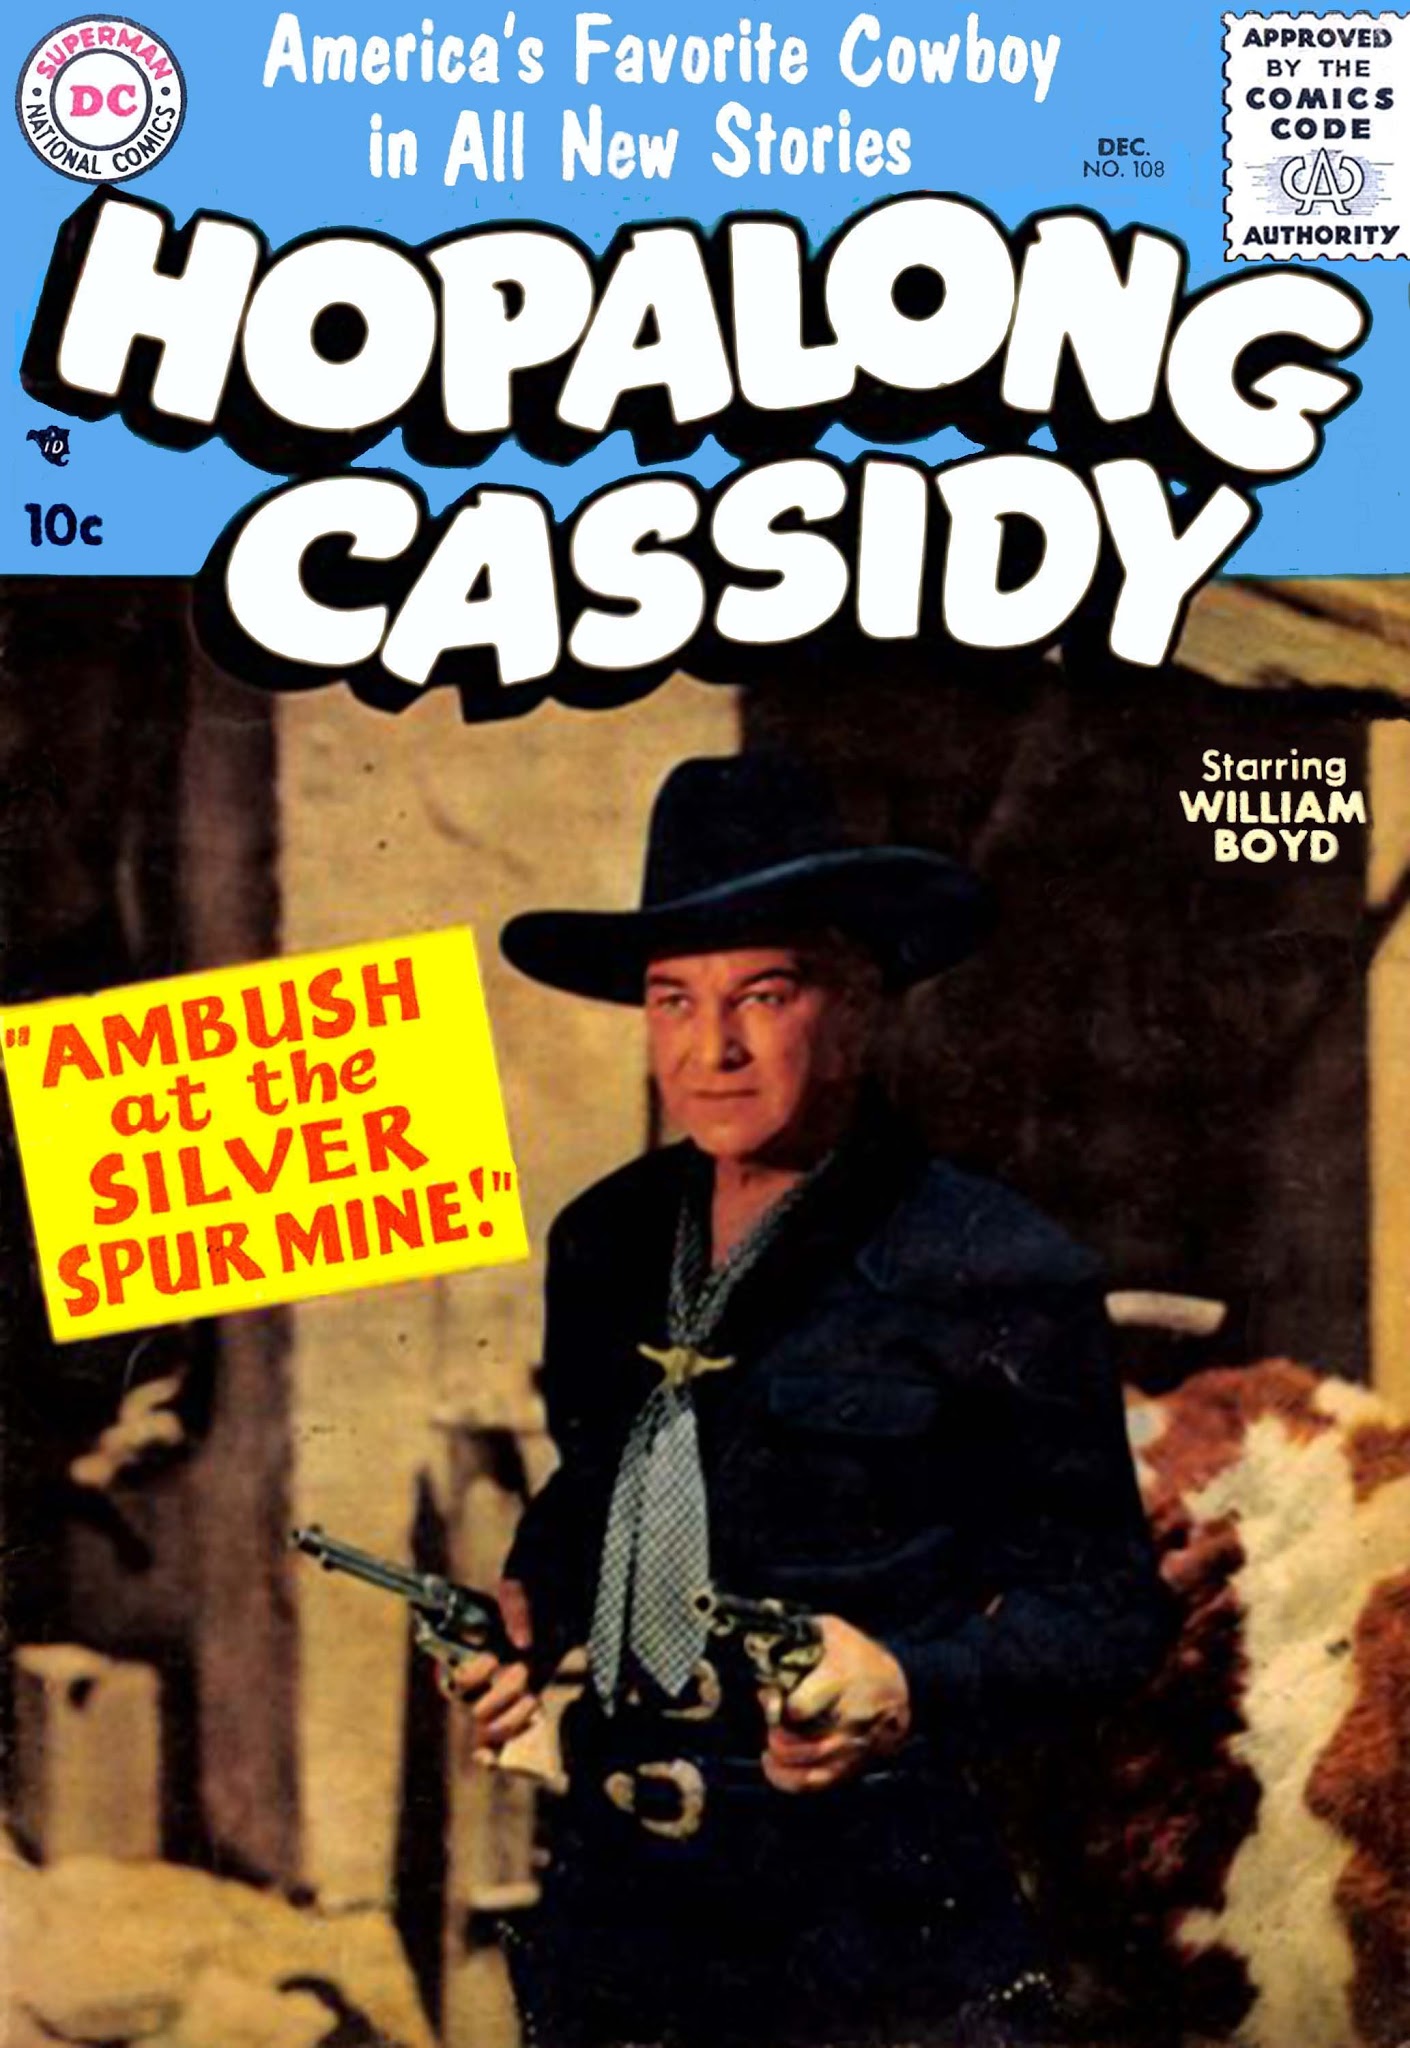 Read online Hopalong Cassidy comic -  Issue #108 - 1